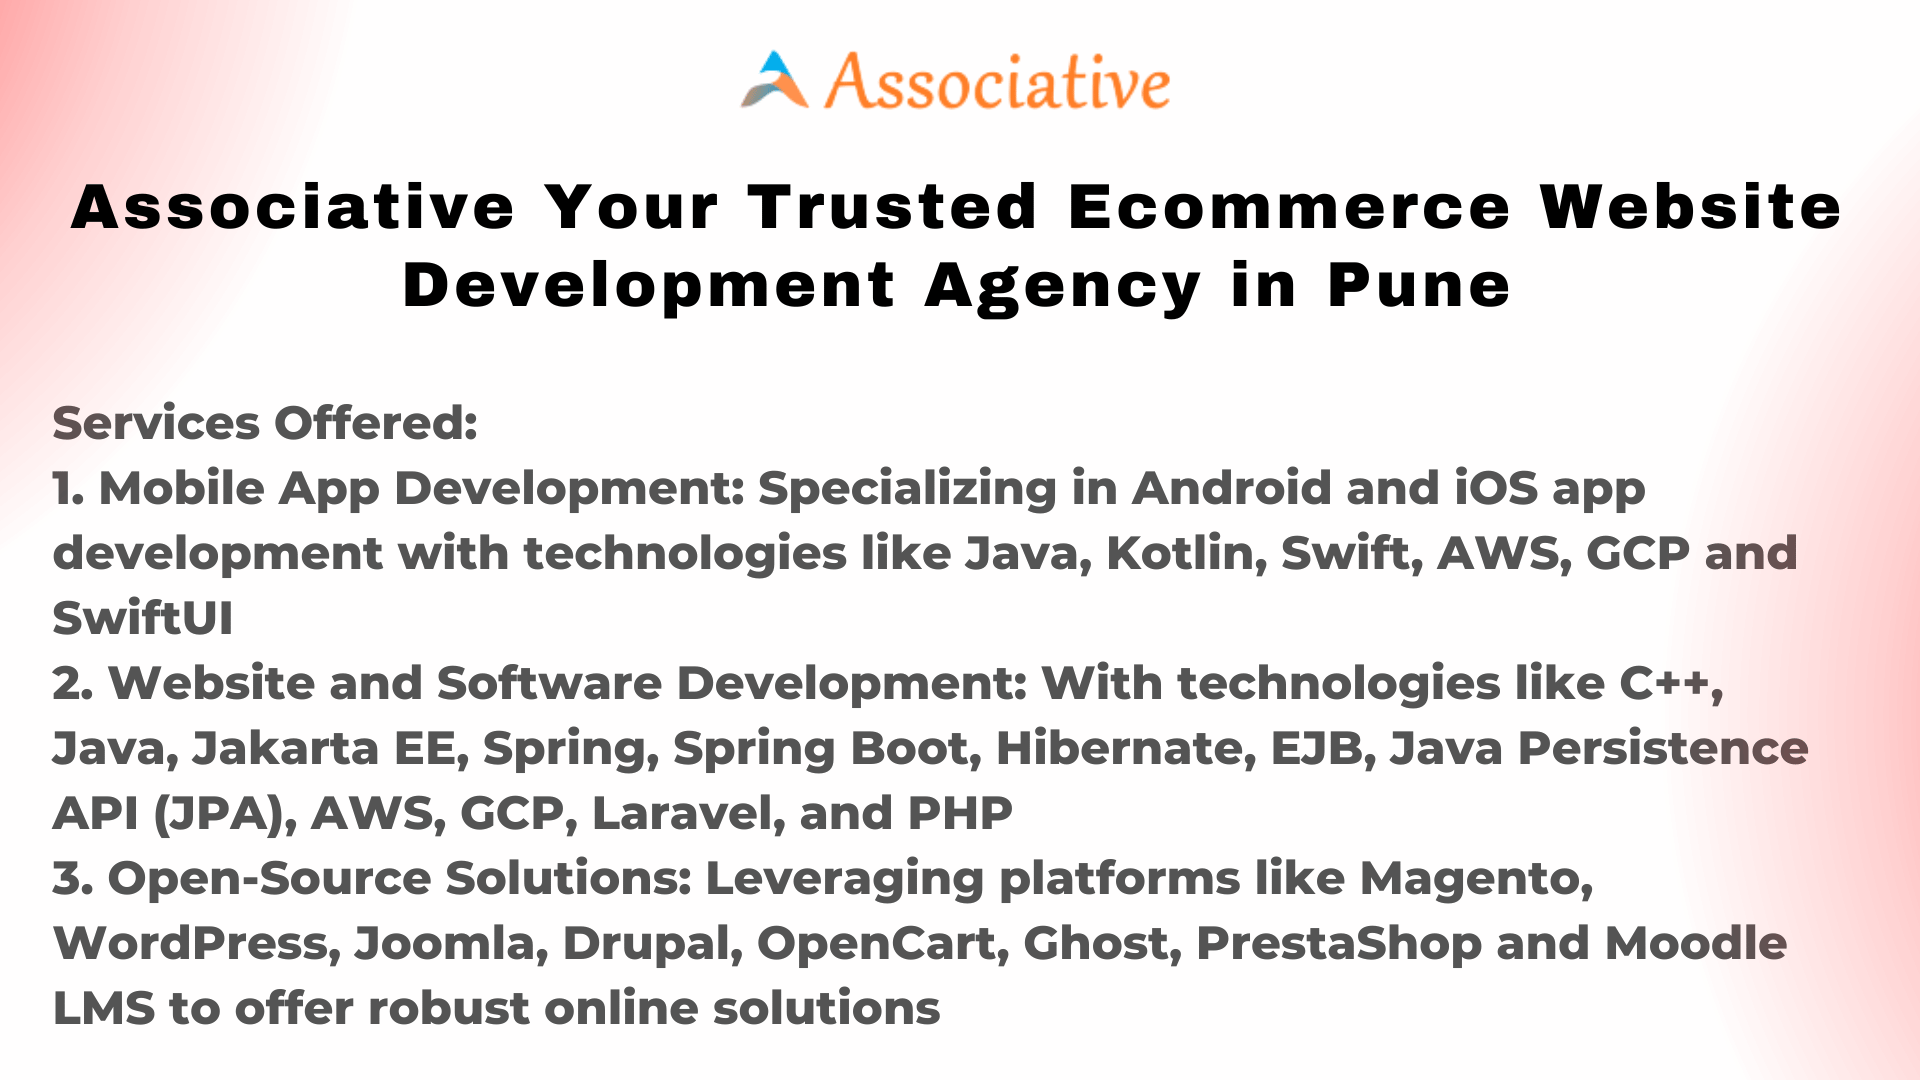 Associative Your Trusted Ecommerce Website Development Agency in Pune